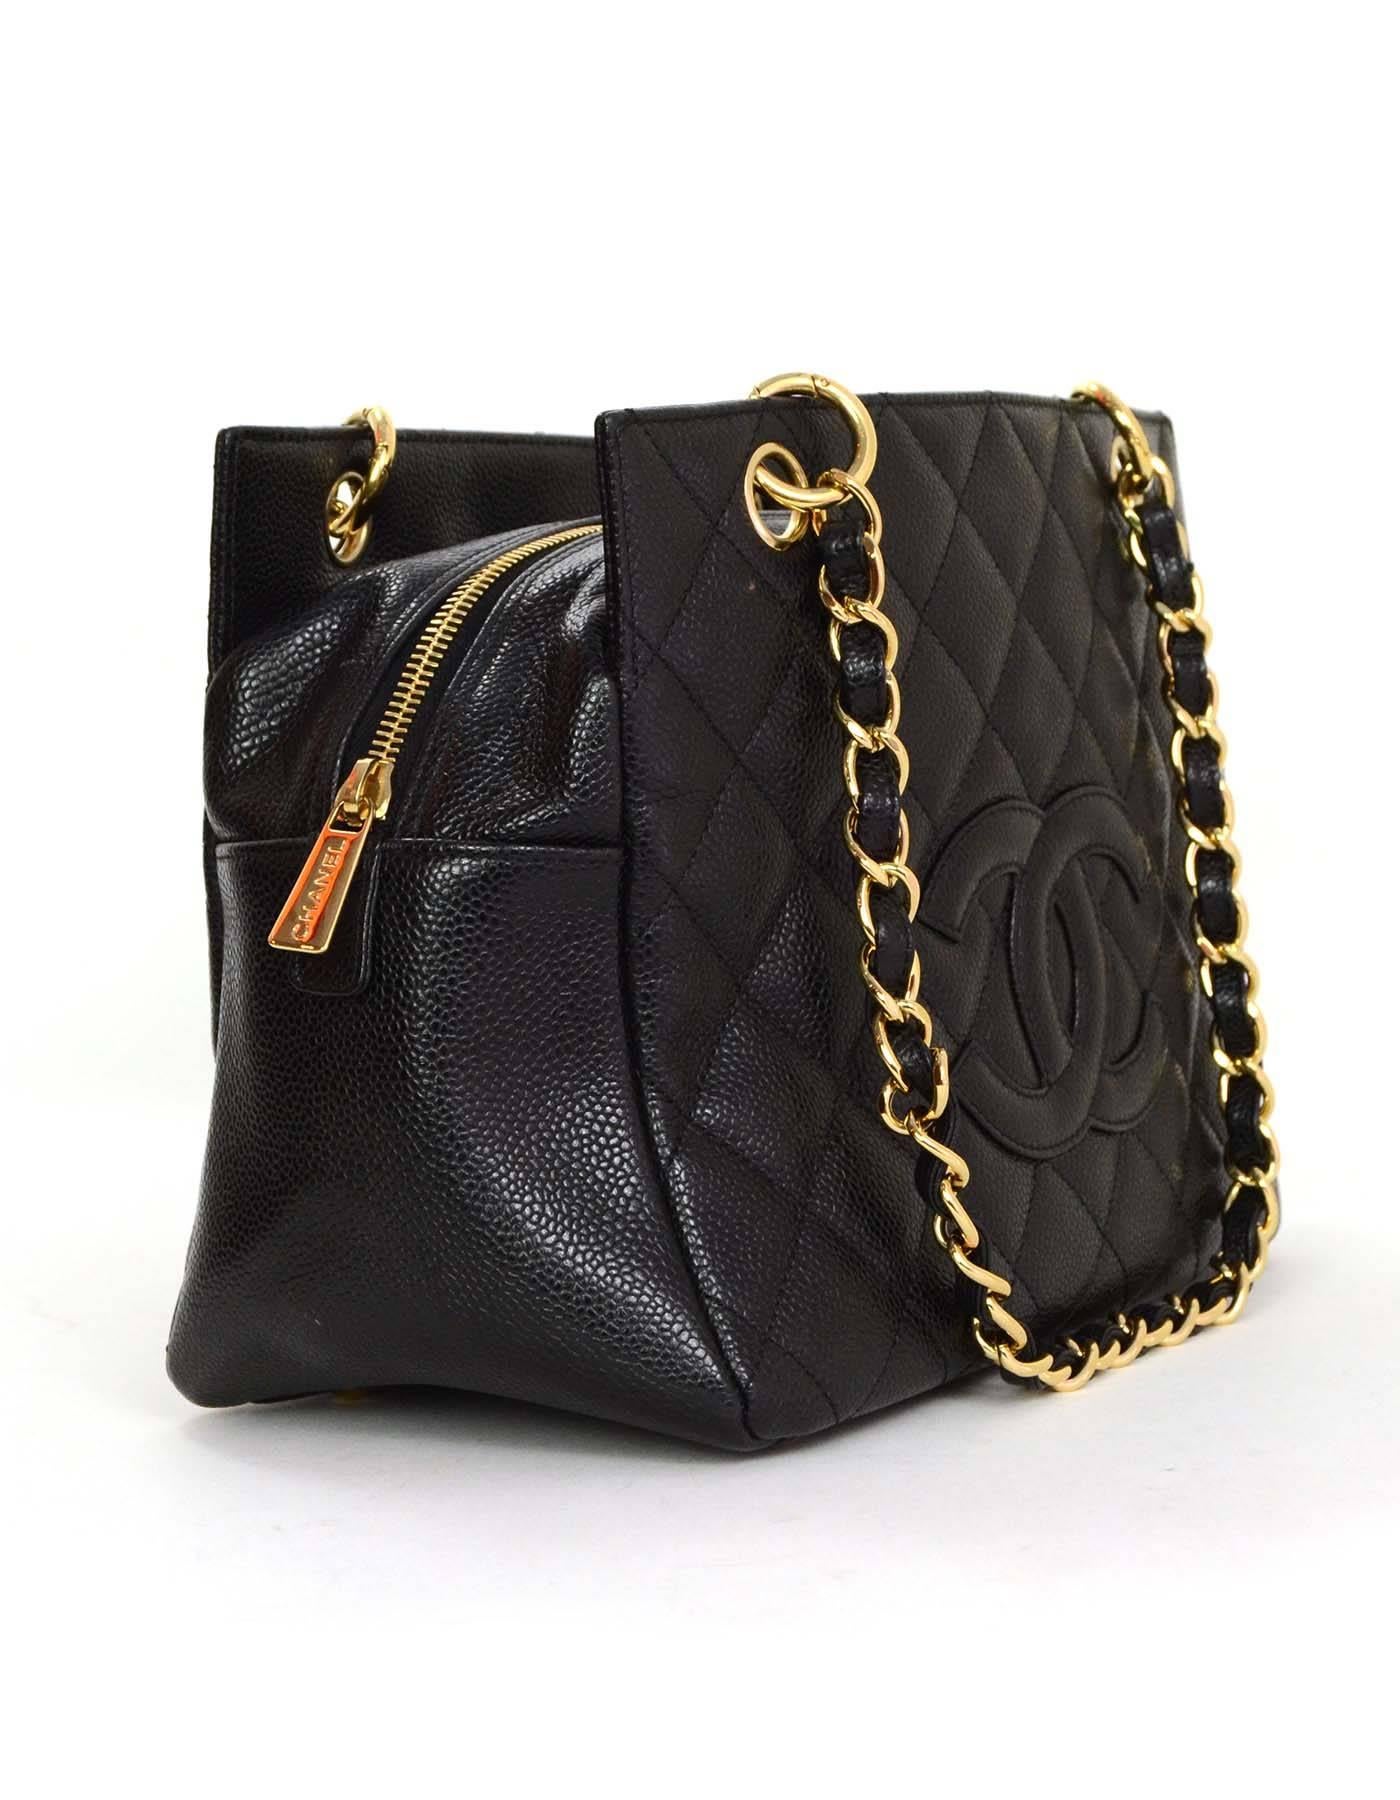 Chanel Black Caviar Timeless Tote
Features stitched CC on front of bag and quilting throughout with classic leather laced chain straps

-Made in: Italy
-Year of Production: 2005-2006
-Color: Black
-Hardware: Goldtone
-Materials: Caviar